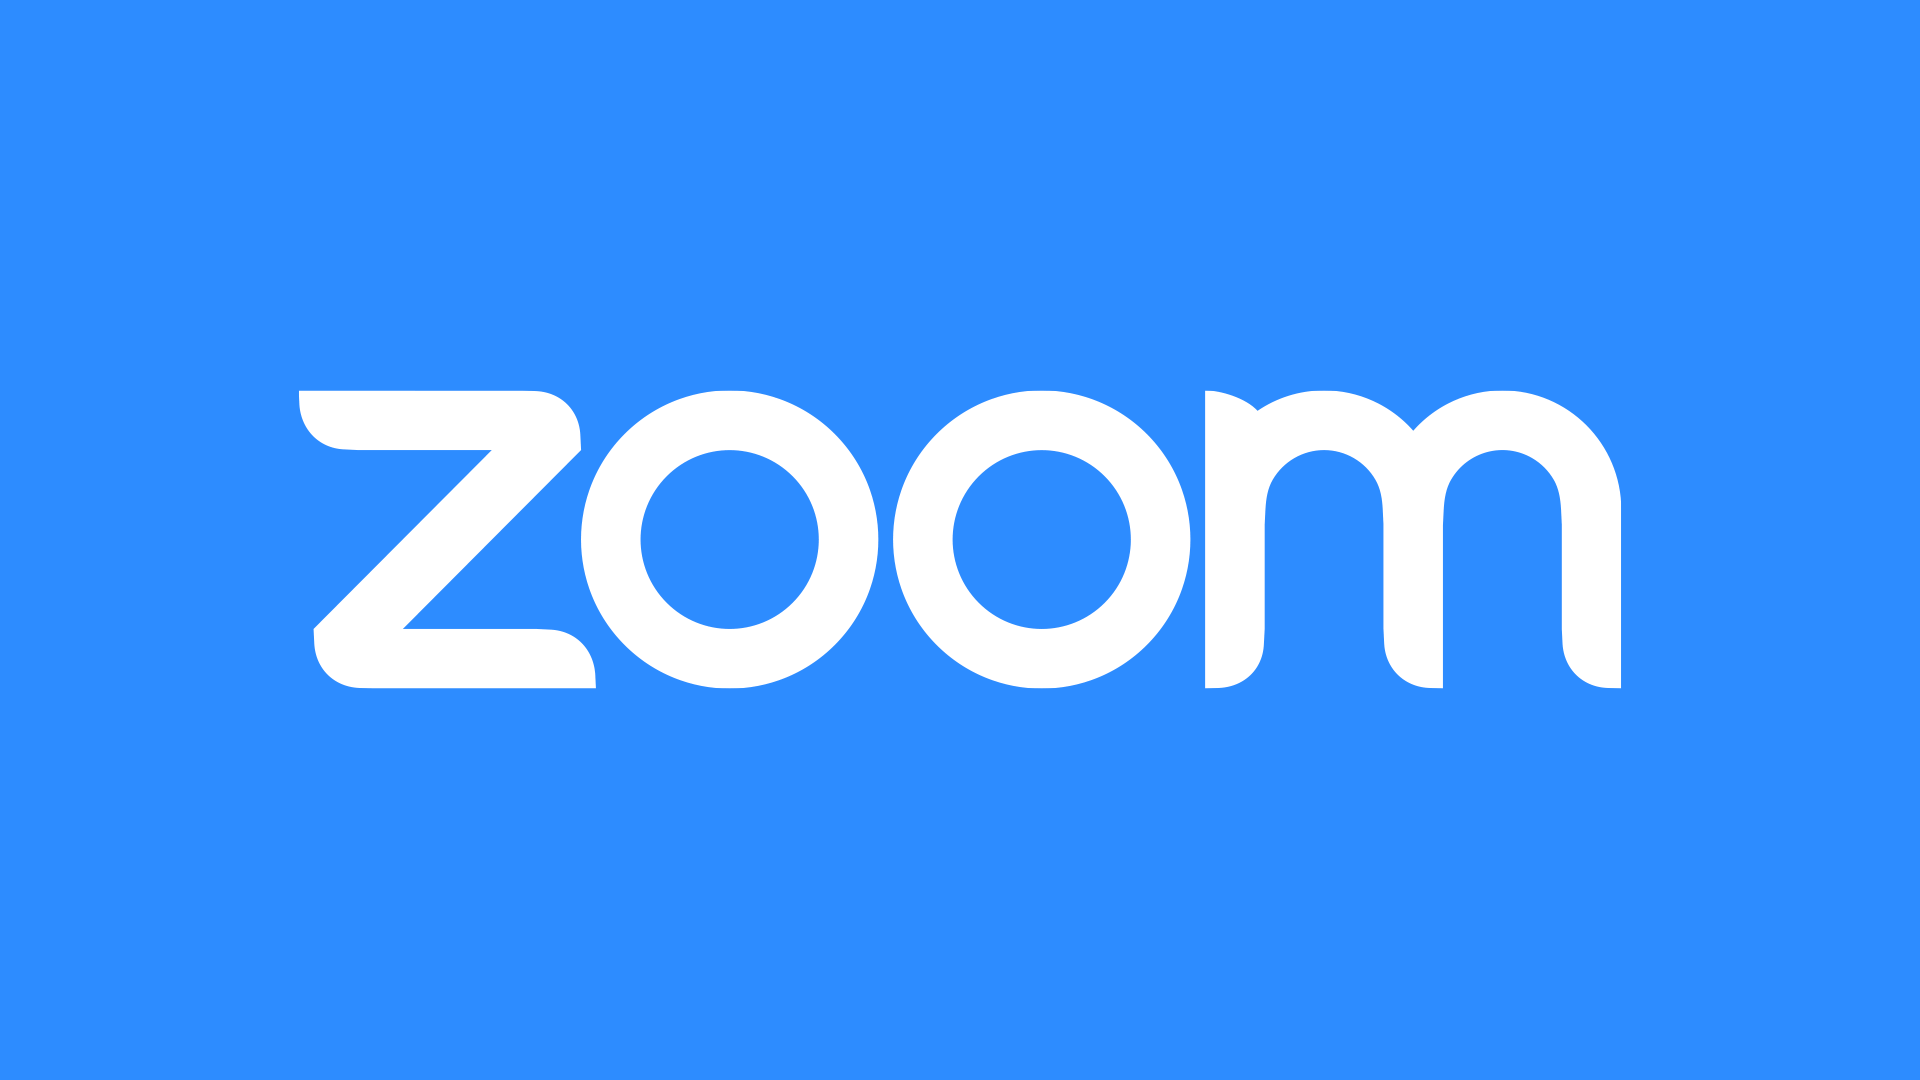 Why we're getting Zoom fatigue - Axios